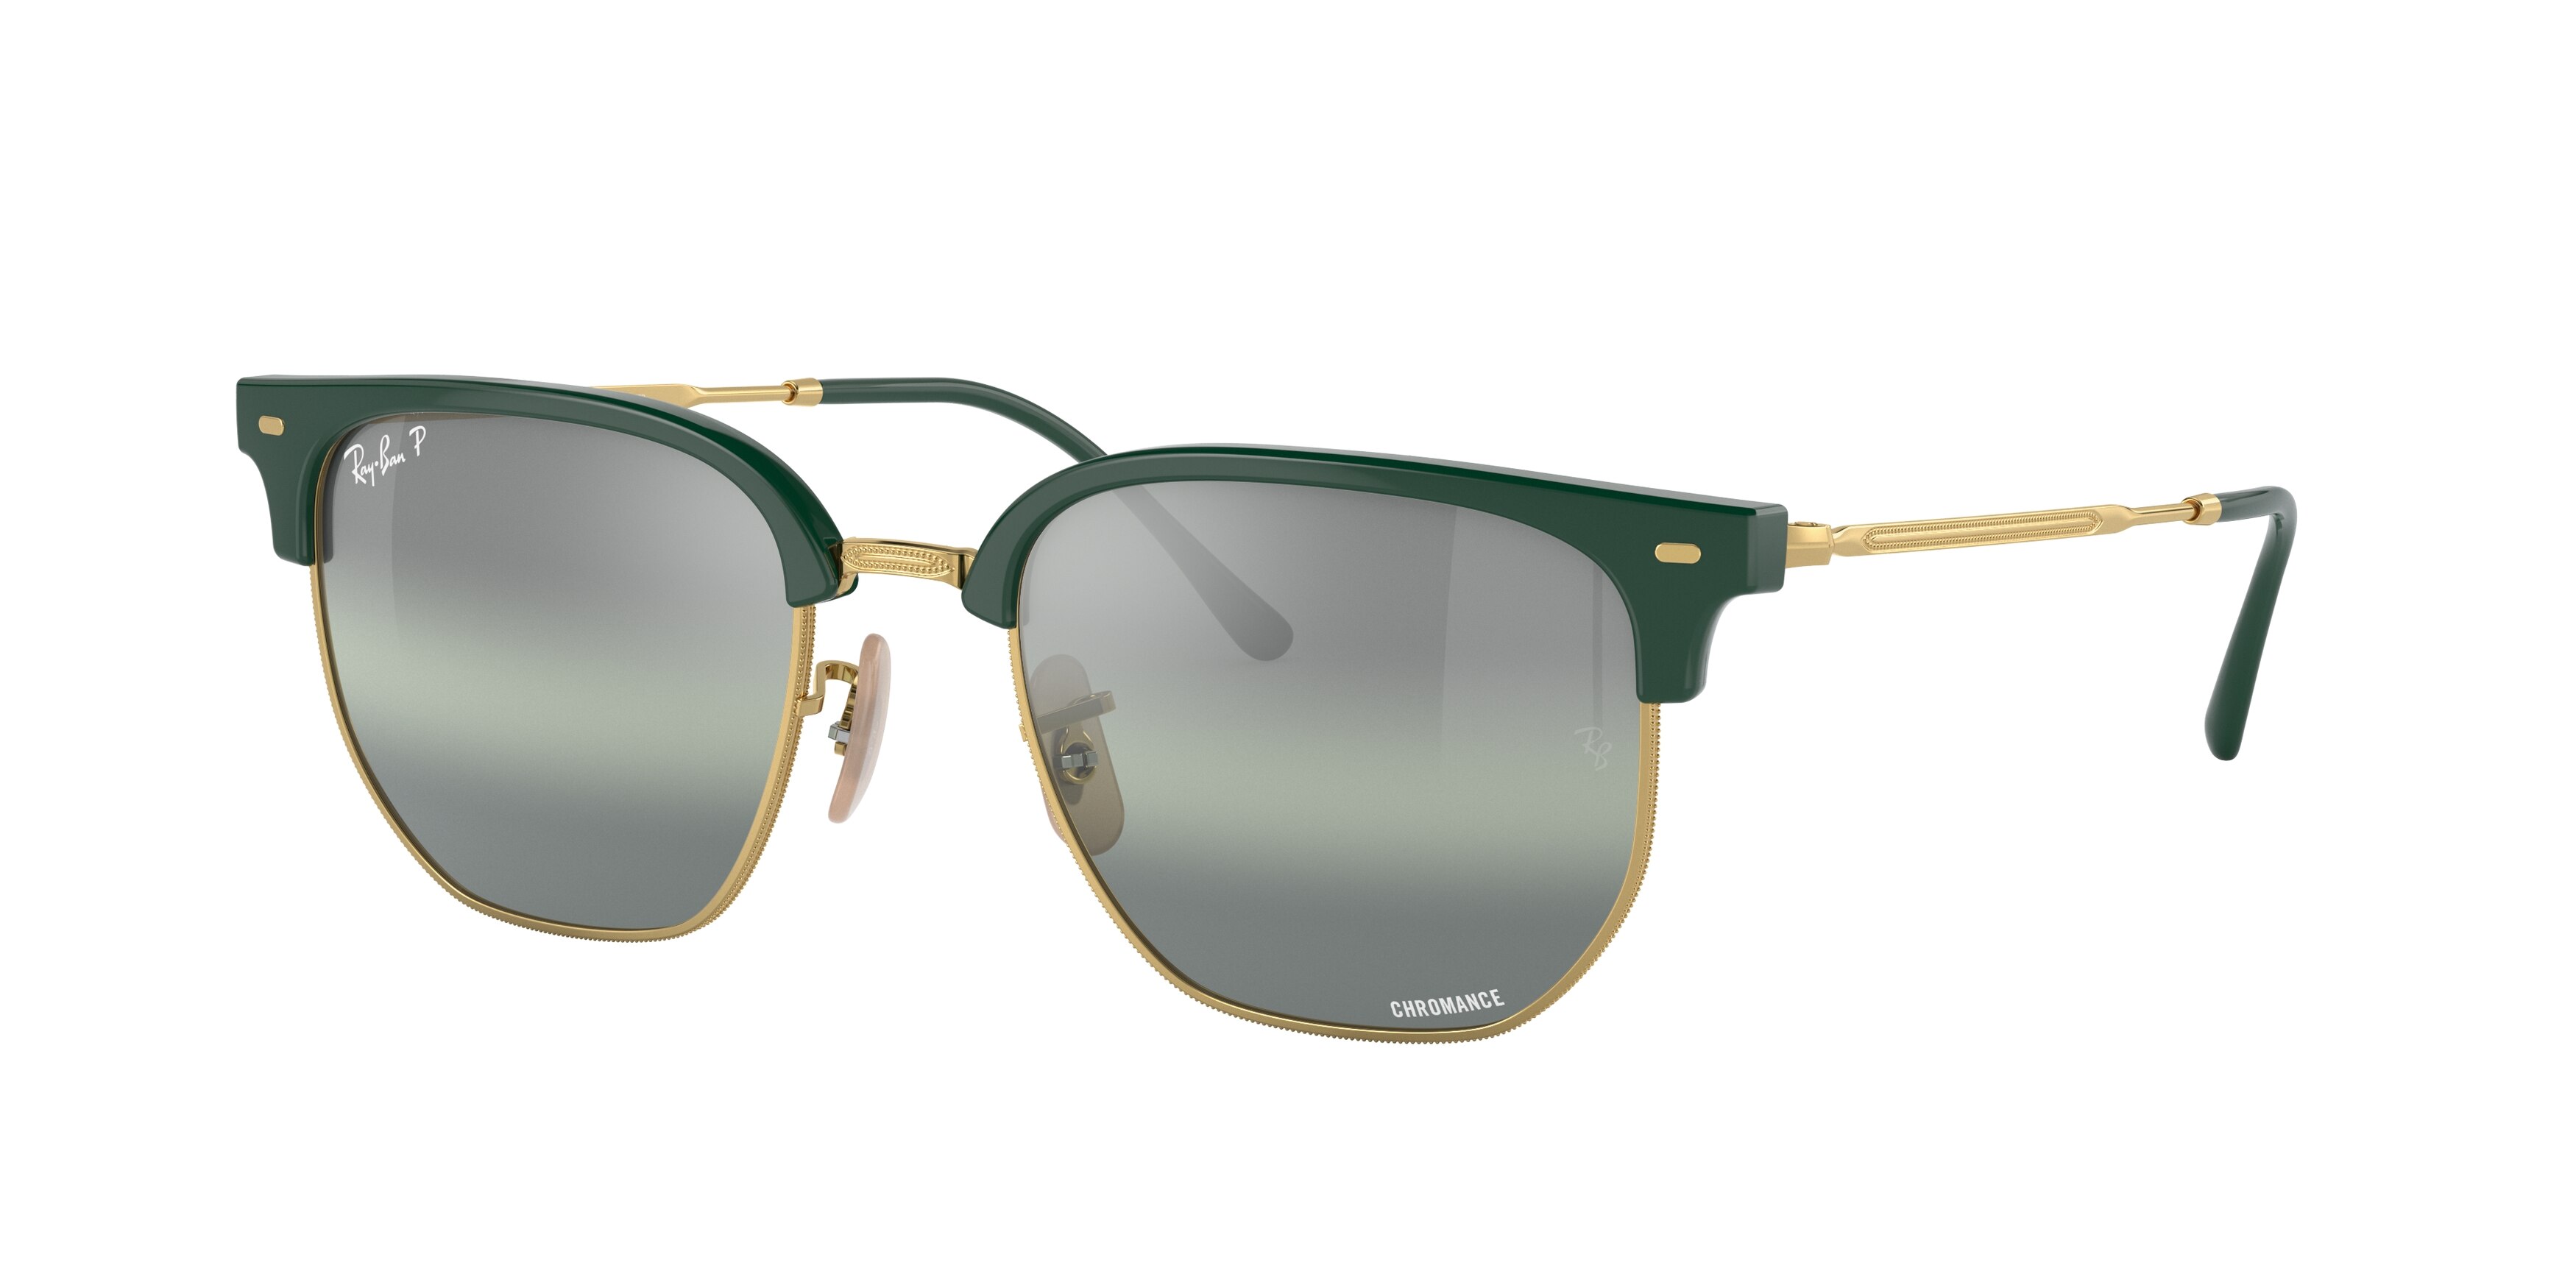 Ray Ban RB4416 6655G4 New Clubmaster 